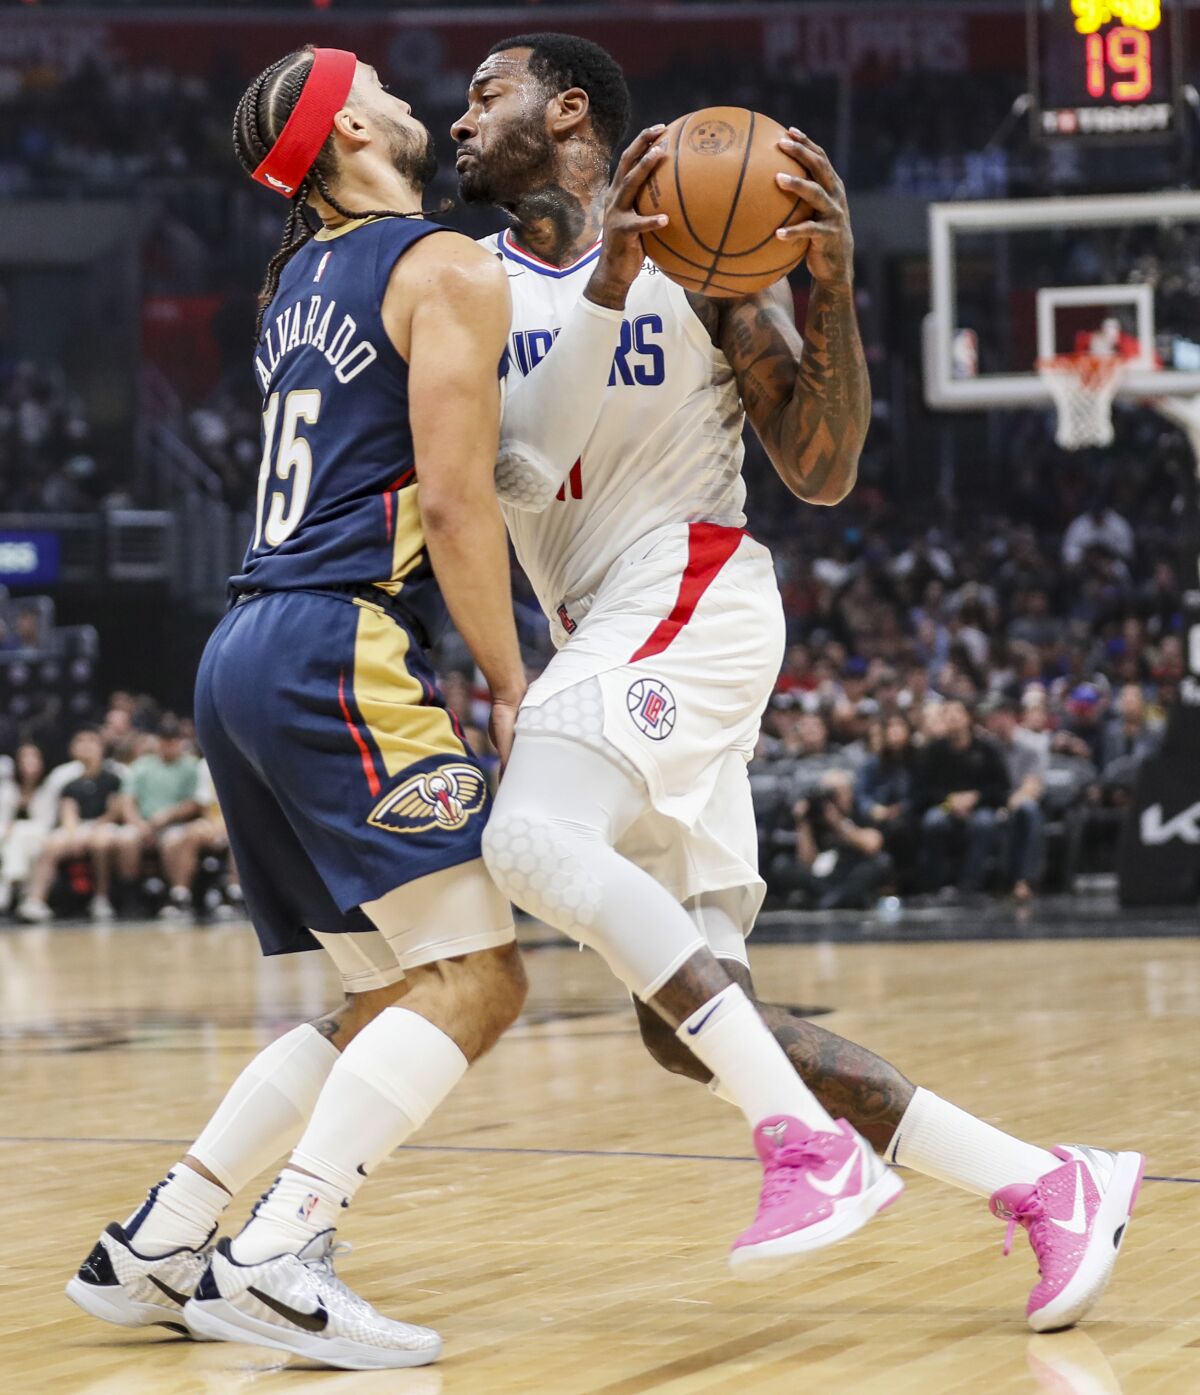 Clippers guard John Wall collides with Pelicans guard Jose Alvarado on a drive to the basket.